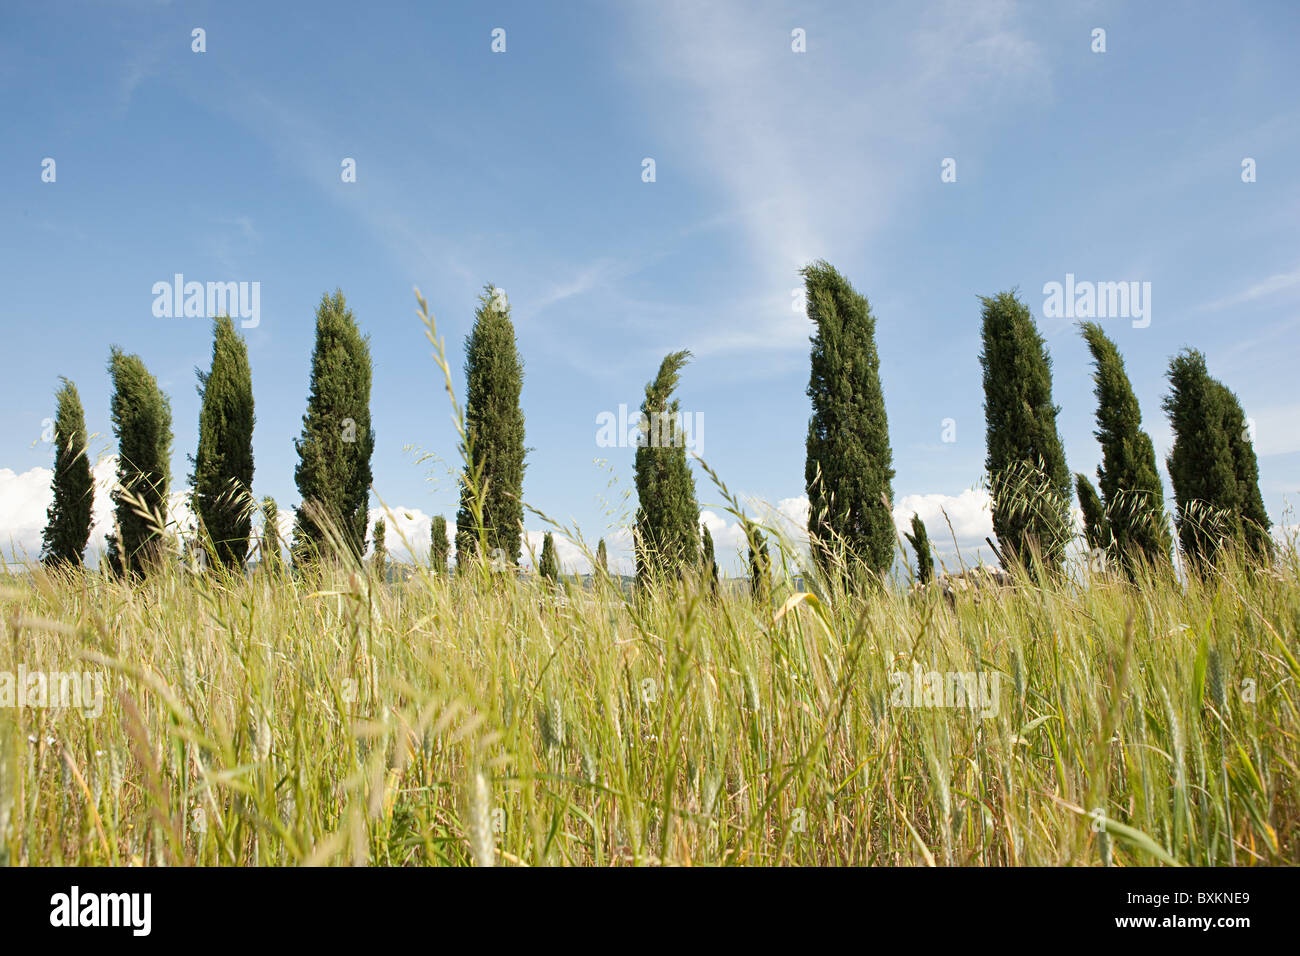 Cypress trees in field, Val d'Orcia, Italy Stock Photo